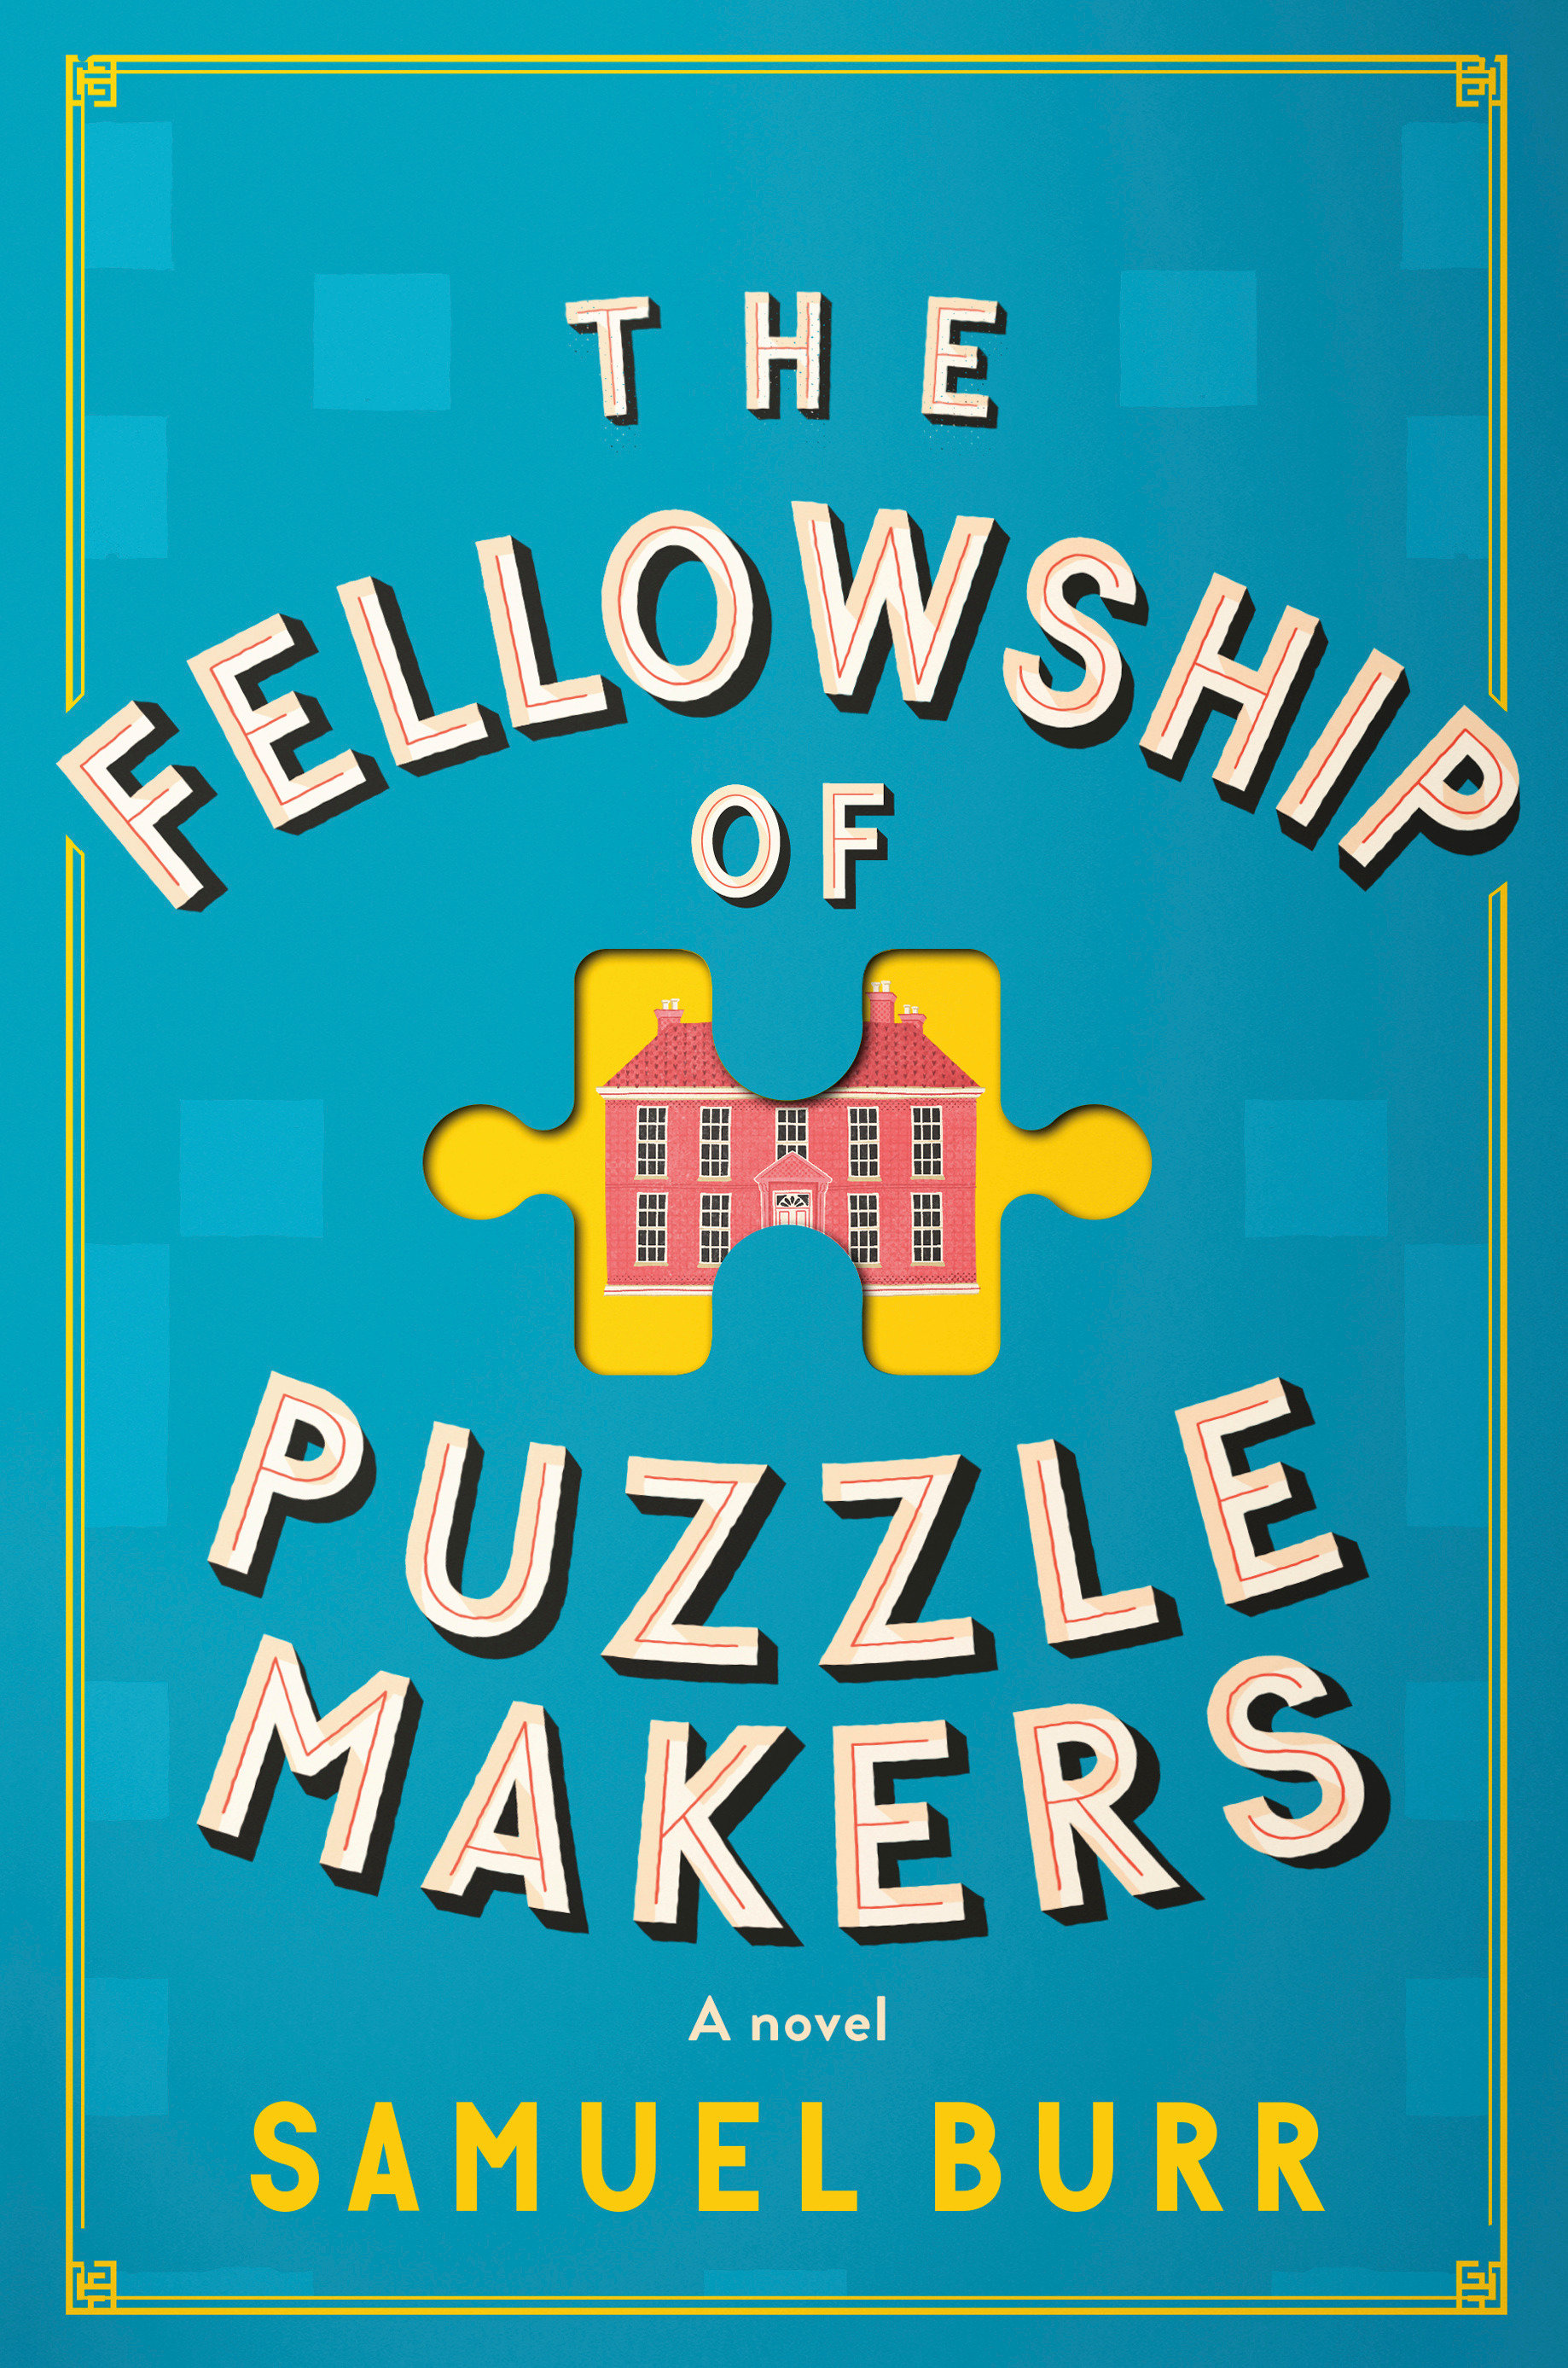 The Fellowship Of Puzzlemakers (Hardcover Book)